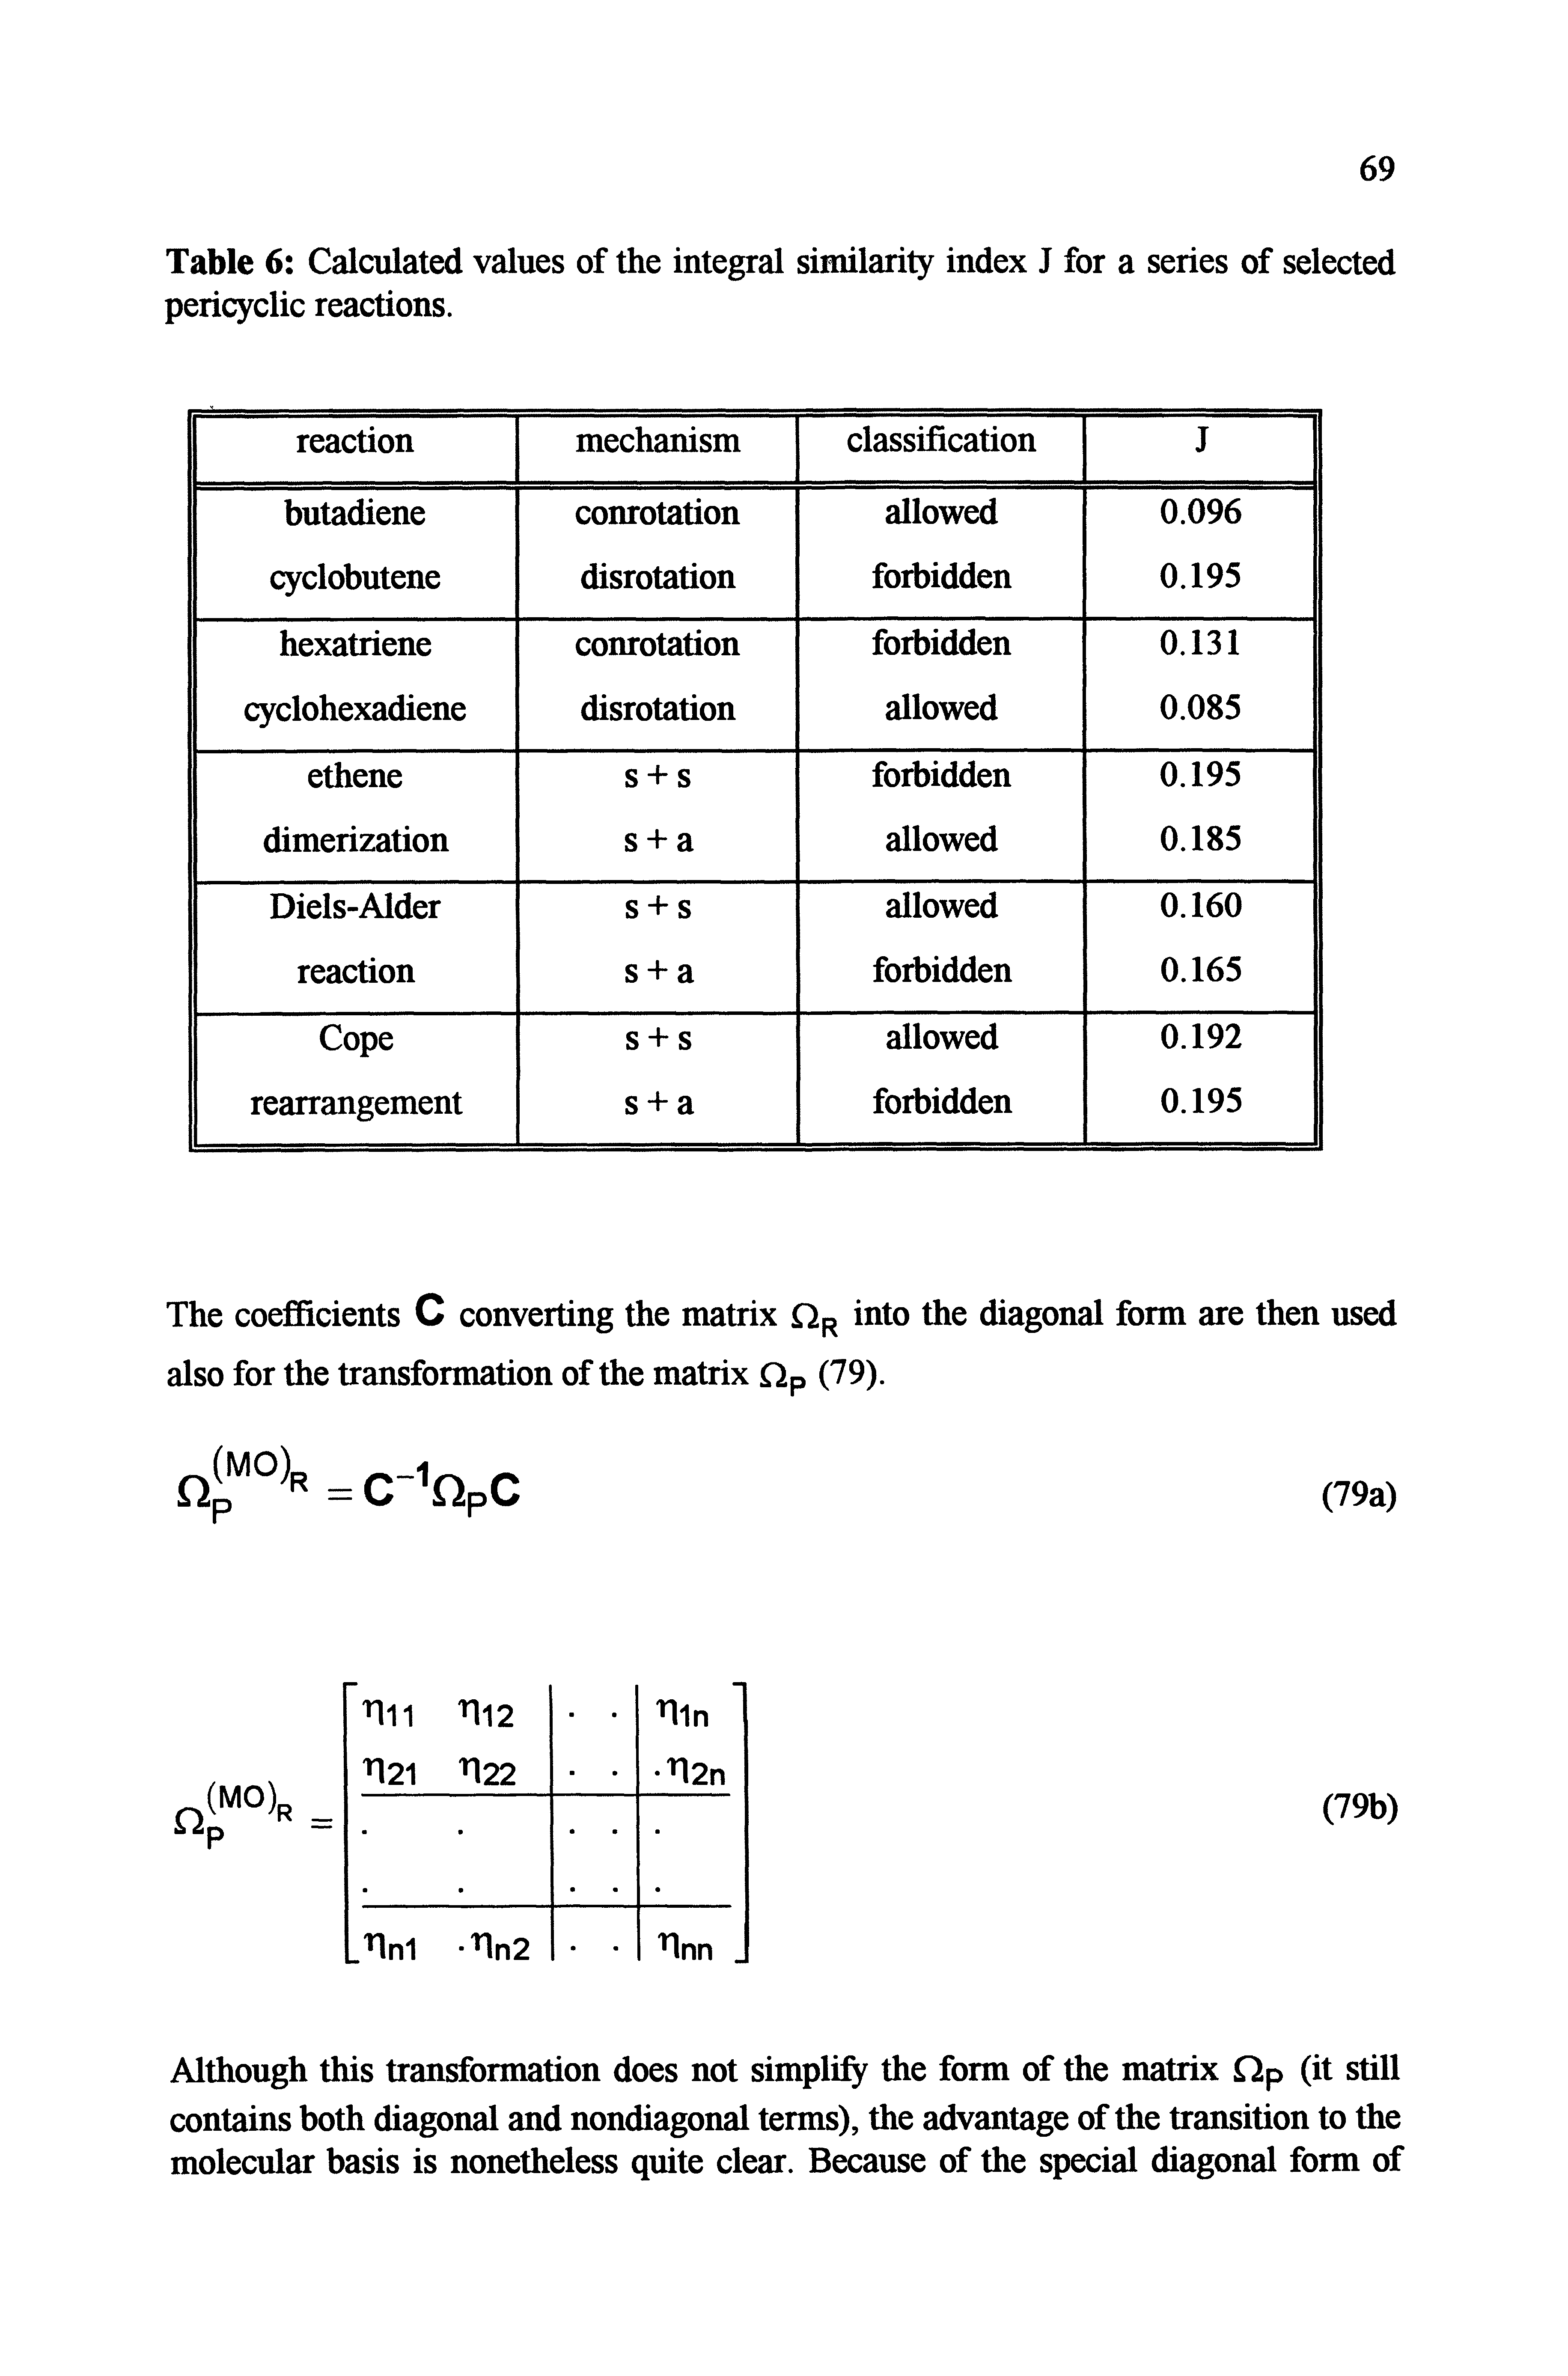 Table 6 Calculated values of the integral similarity index J for a series of selected pericyclic reactions.